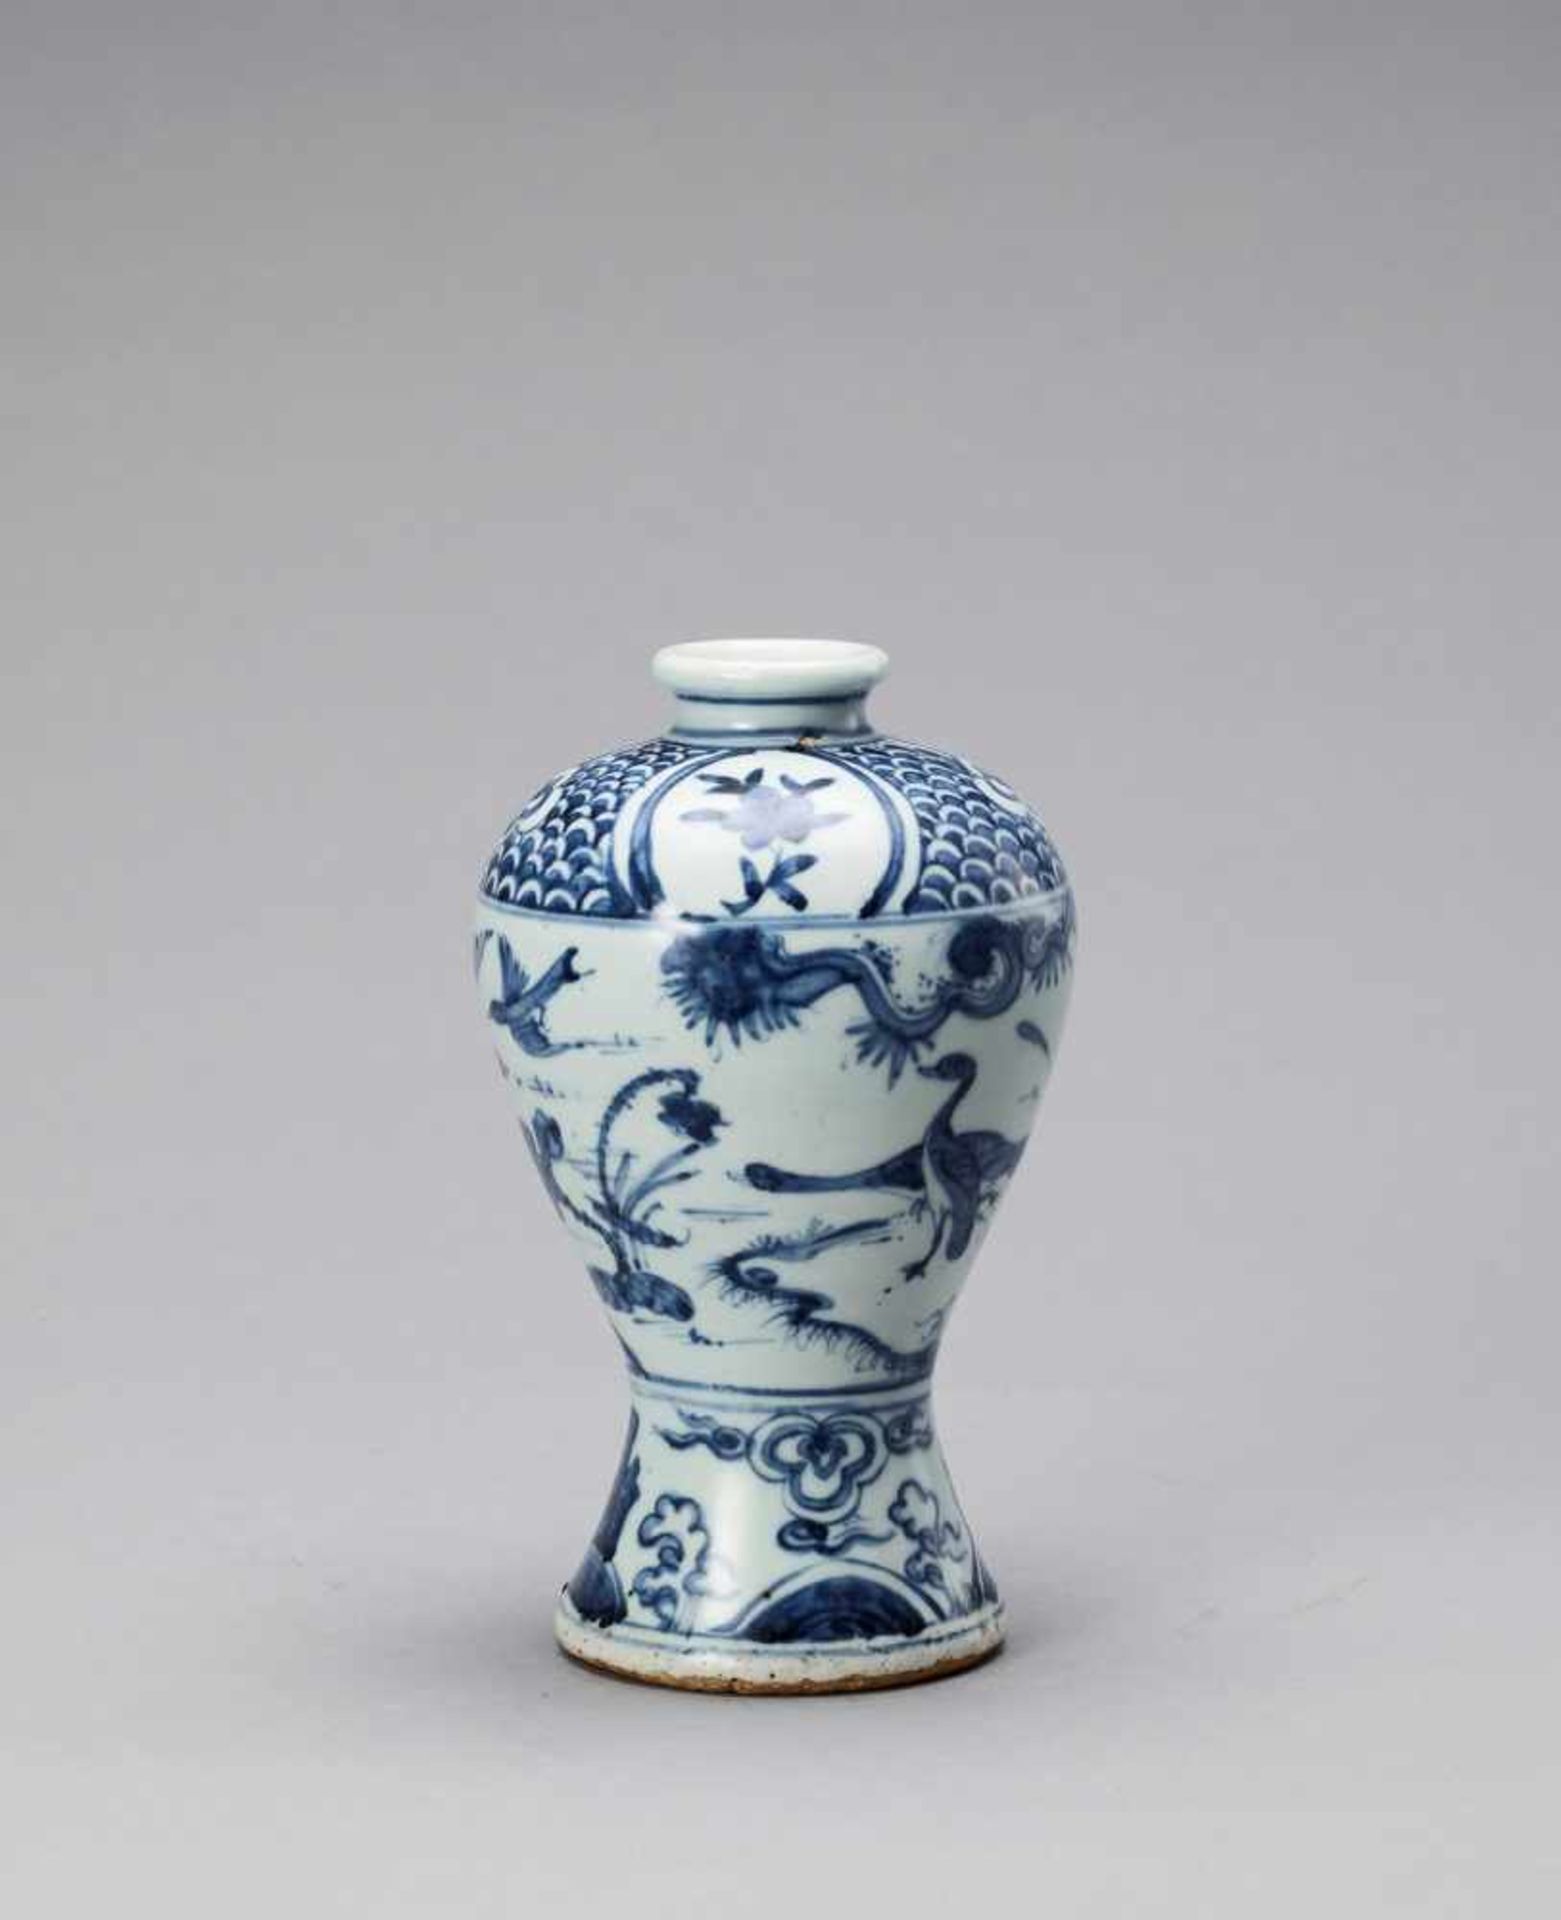 A BLUE AND WHITE GLAZED PORCELAIN MEIPING VASE, LATE MING - Image 2 of 6